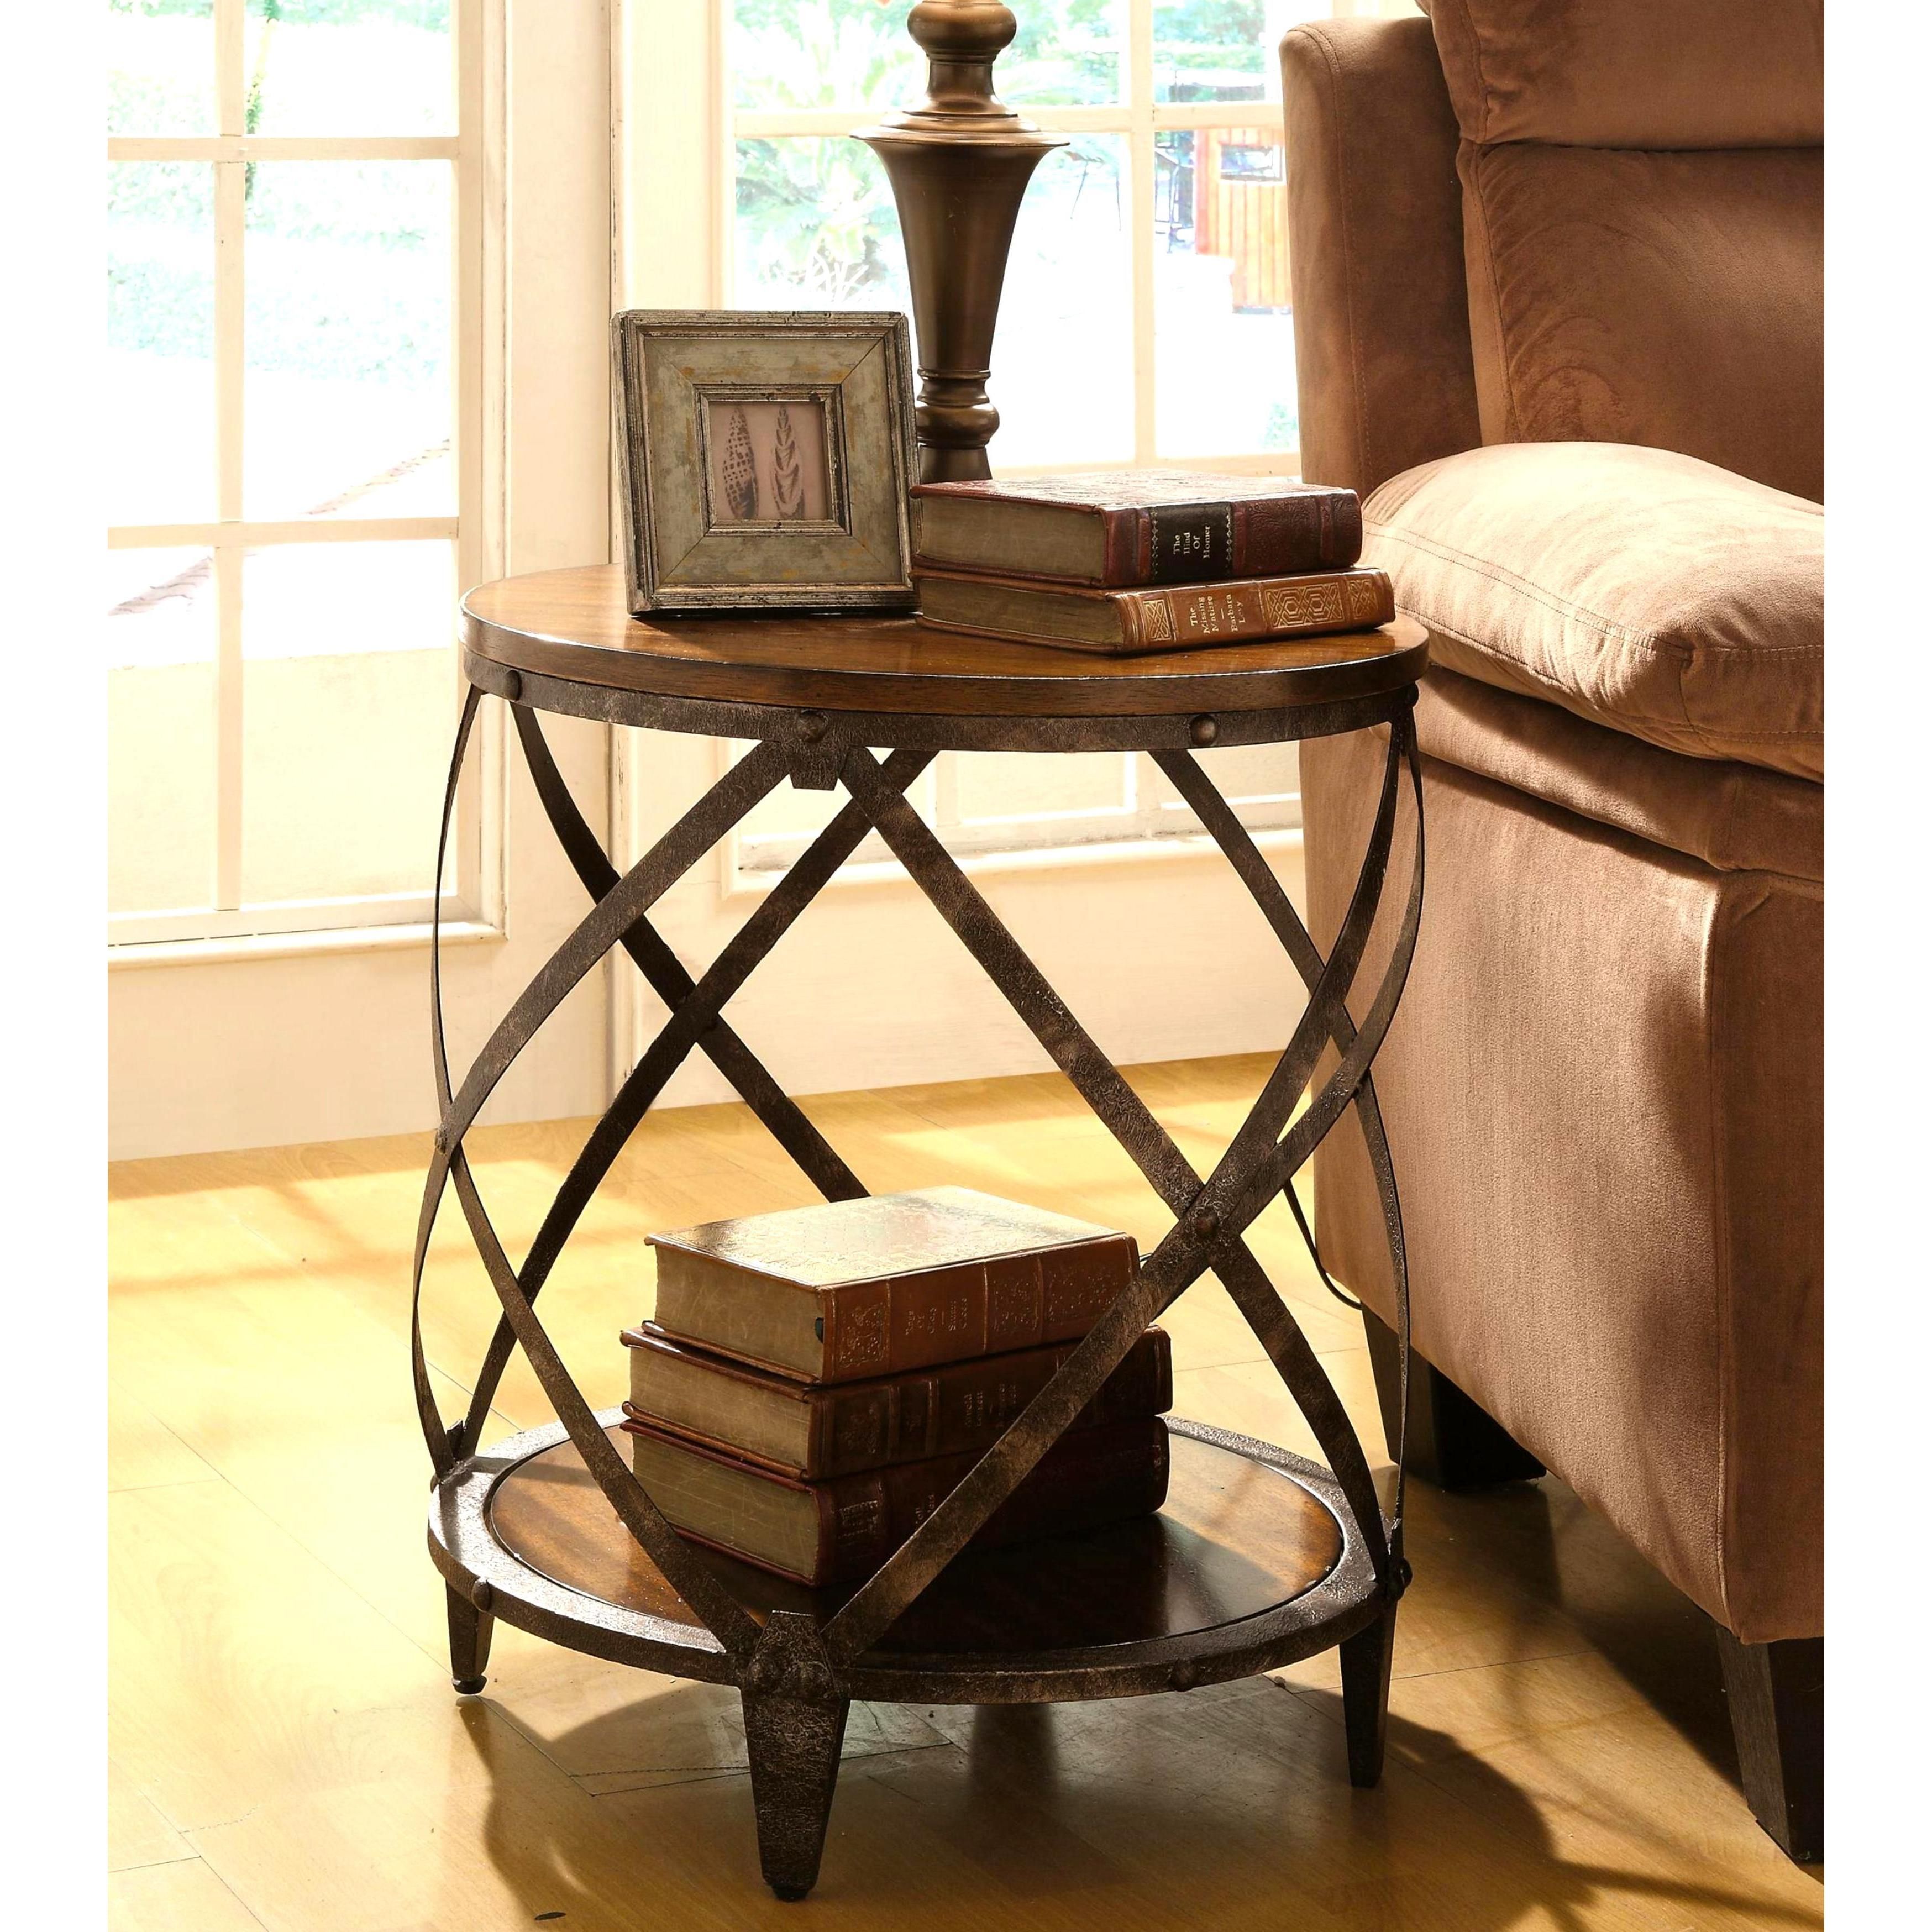 give your home contemporary and industrial appeal with this accent round drum table constructed distressed metal frame shape features grey placemats living room sets patio nesting